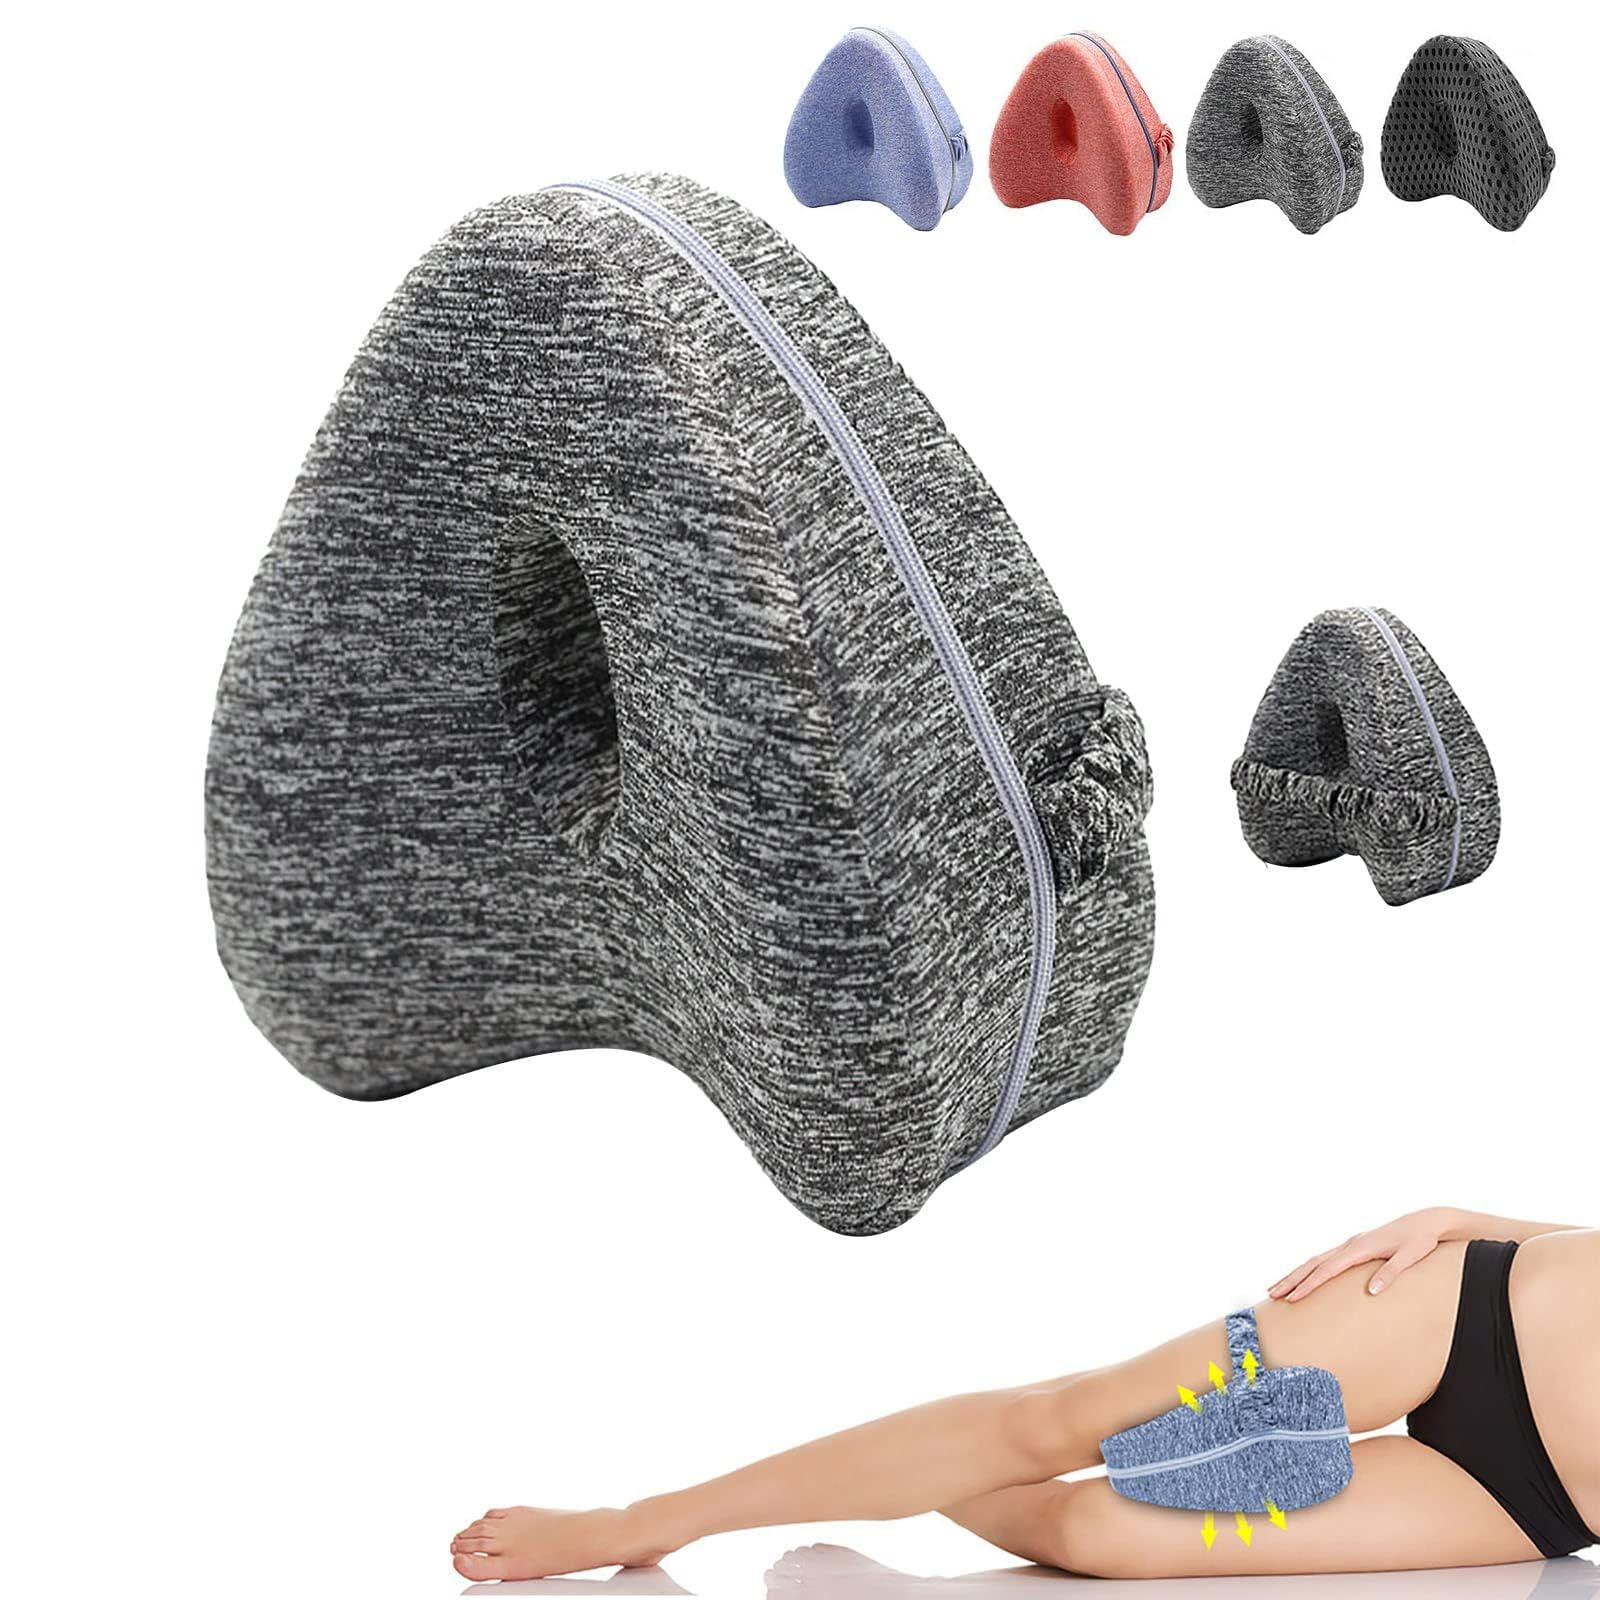 Leg Pillow - Adjusts Your Hips, Legs And Spine For A Comfortable Sleep 